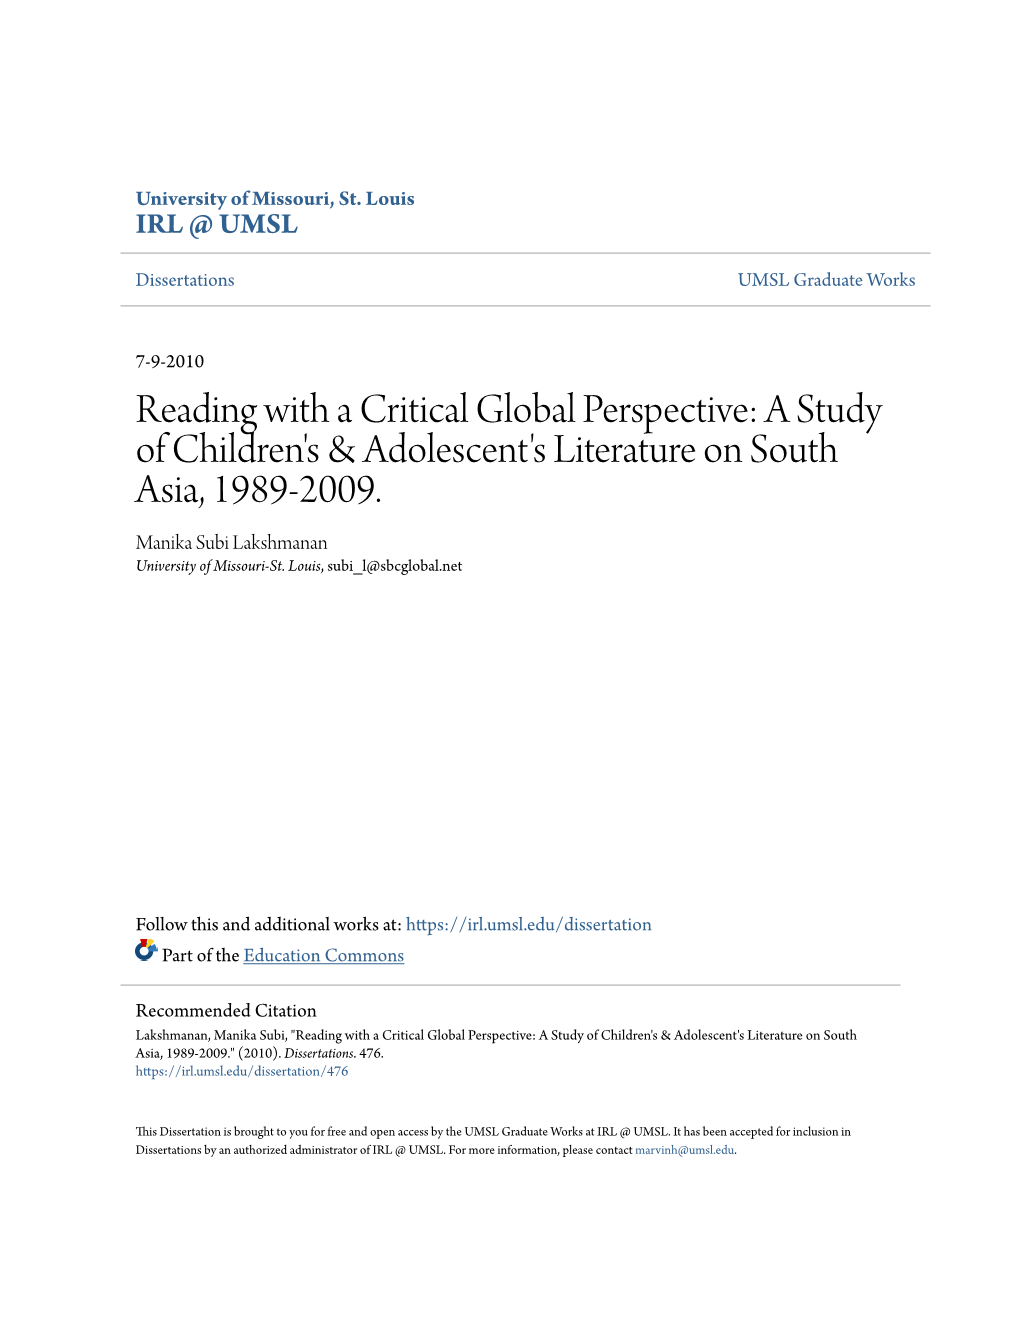 Reading with a Critical Global Perspective: a Study of Children's & Adolescent's Literature on South Asia, 1989-2009